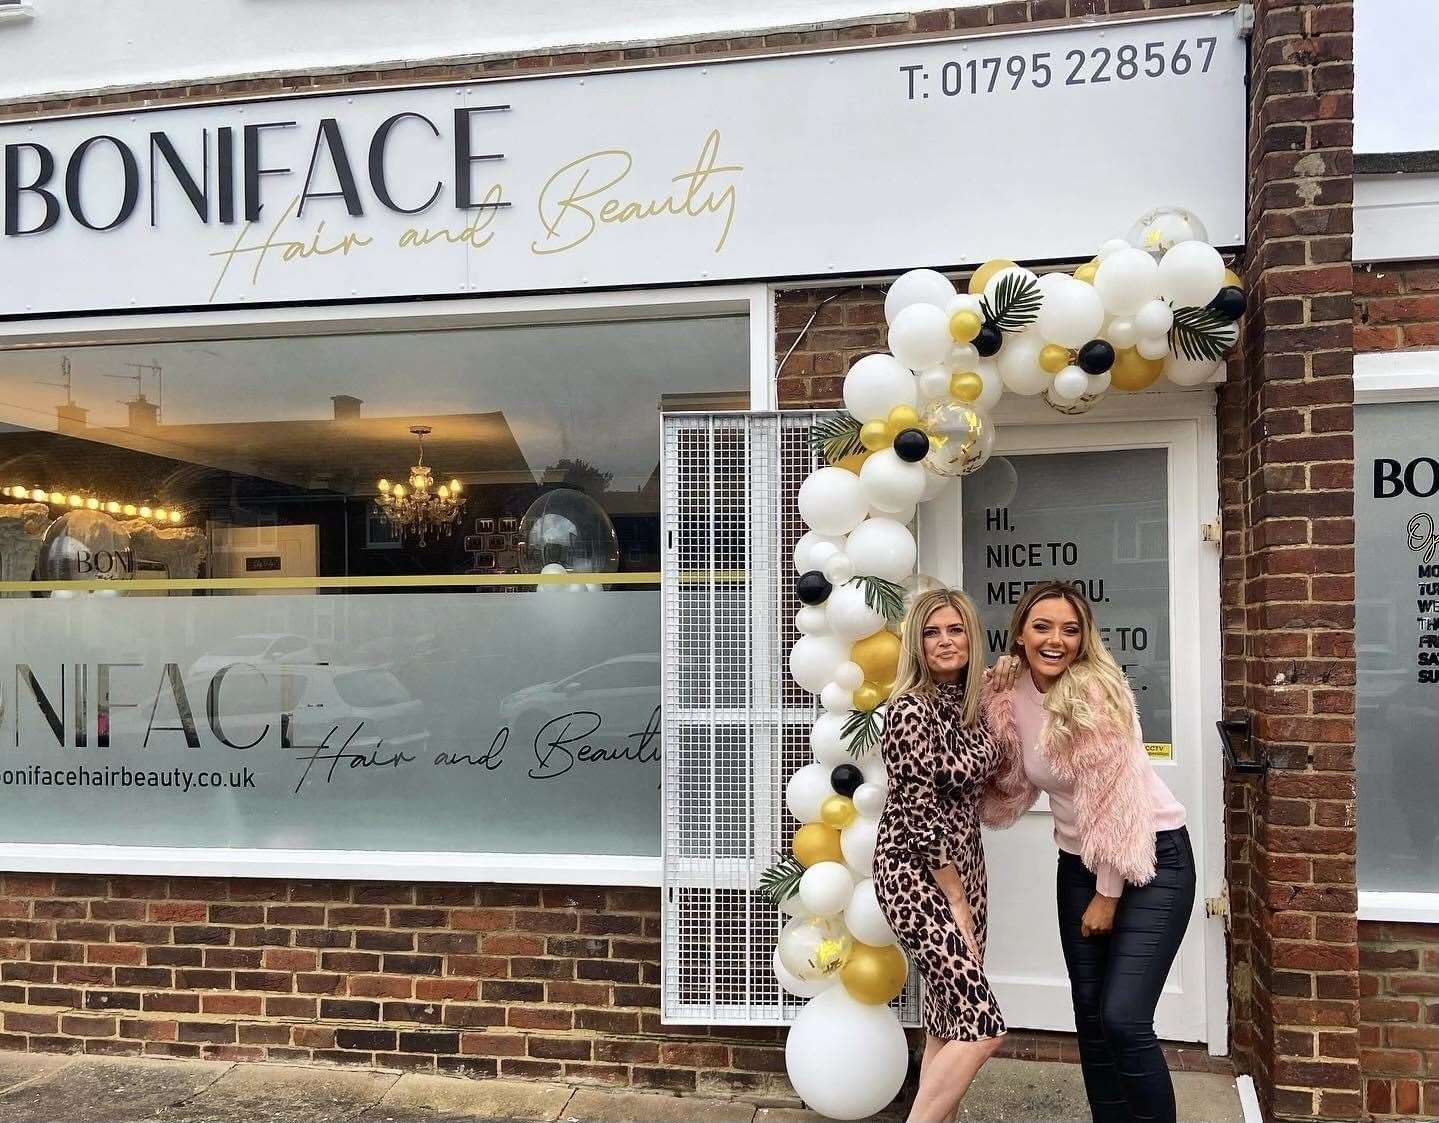 Owners Joanne Halls and Olivia Boniface opened Boniface Hair and Beauty in Sittingbourne last July